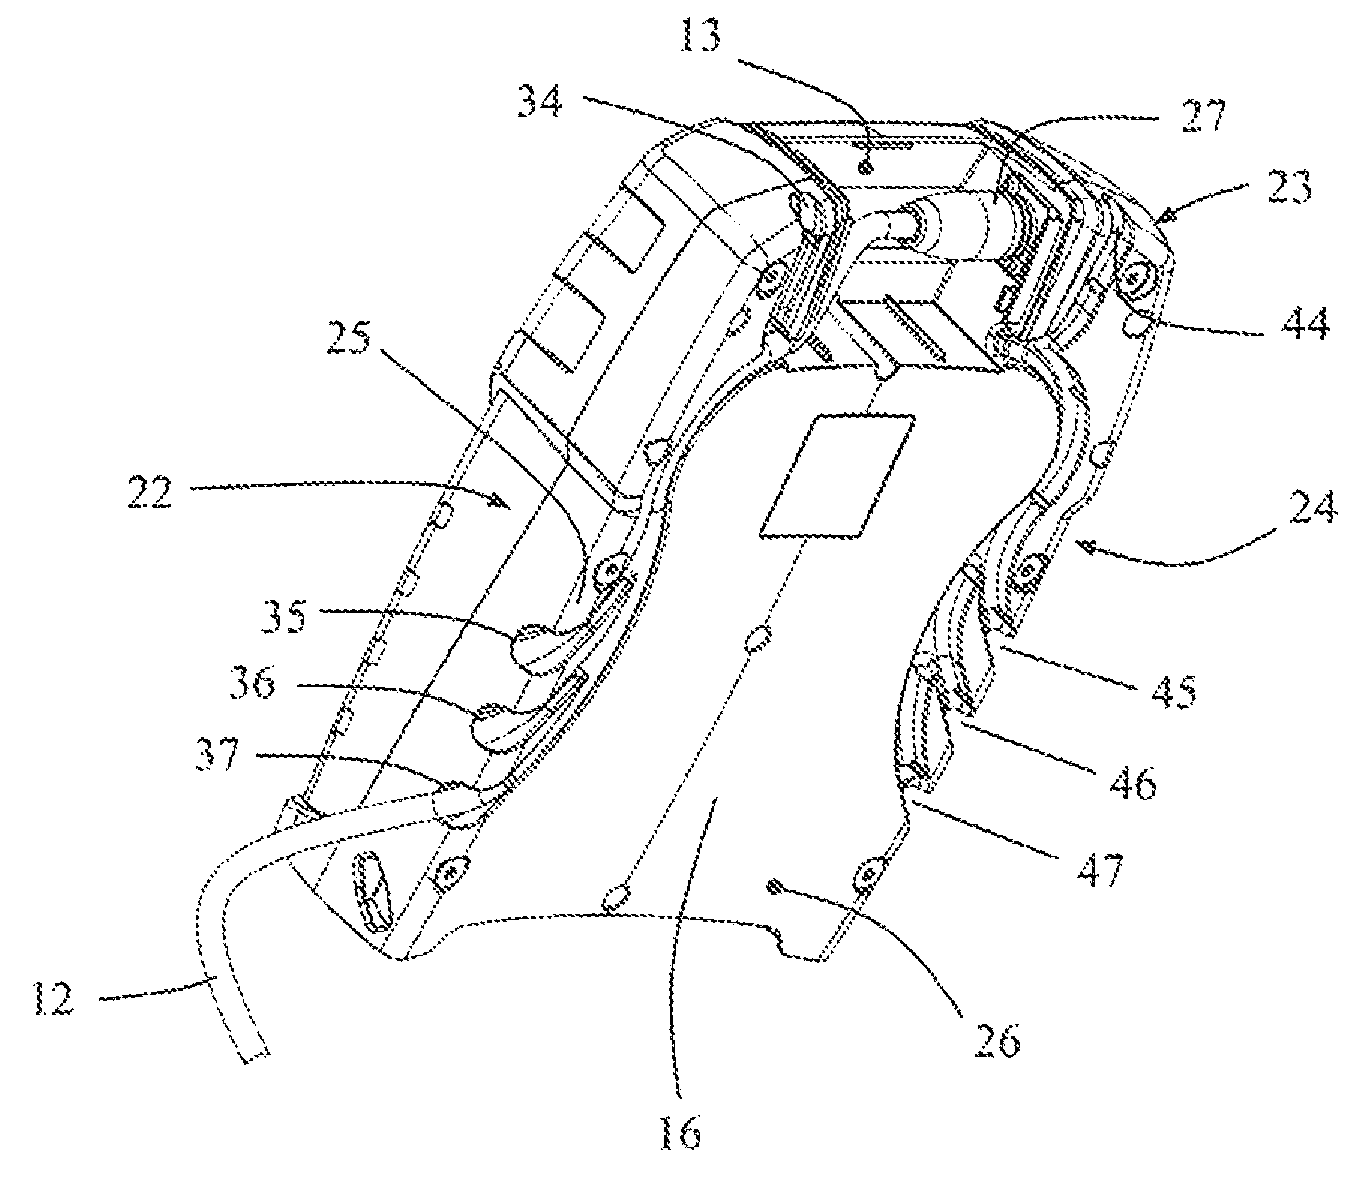 Electric work apparatus with an electric load and a rechargeable battery pack